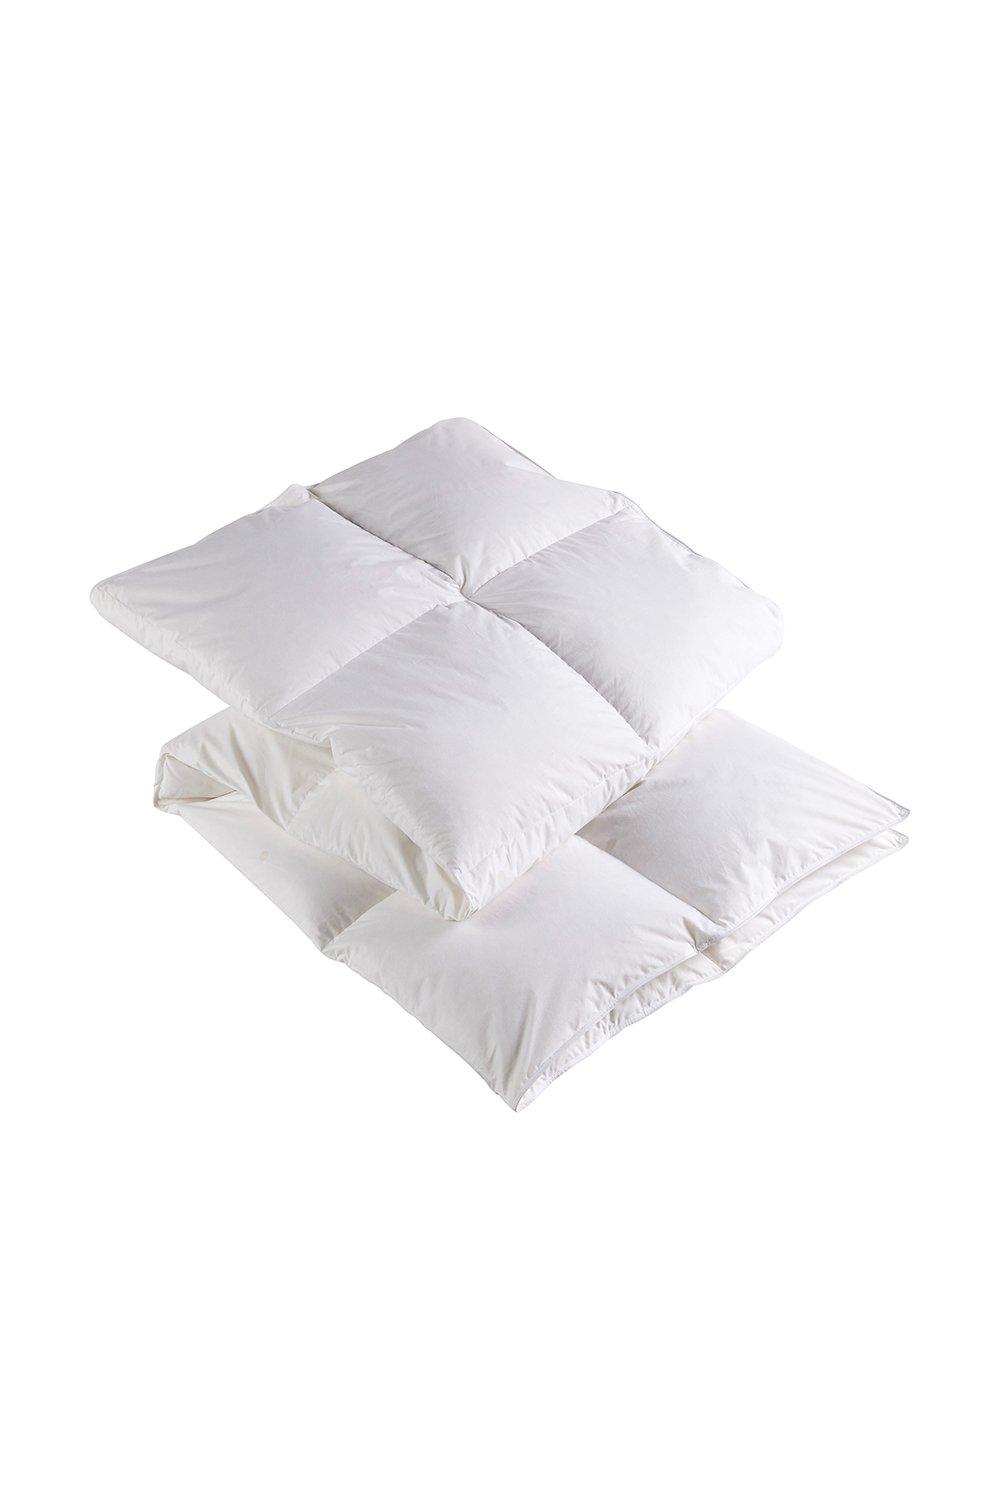 Feather and Down Anti-Dustmite Filled Bedding 13.5 Tog Duvet